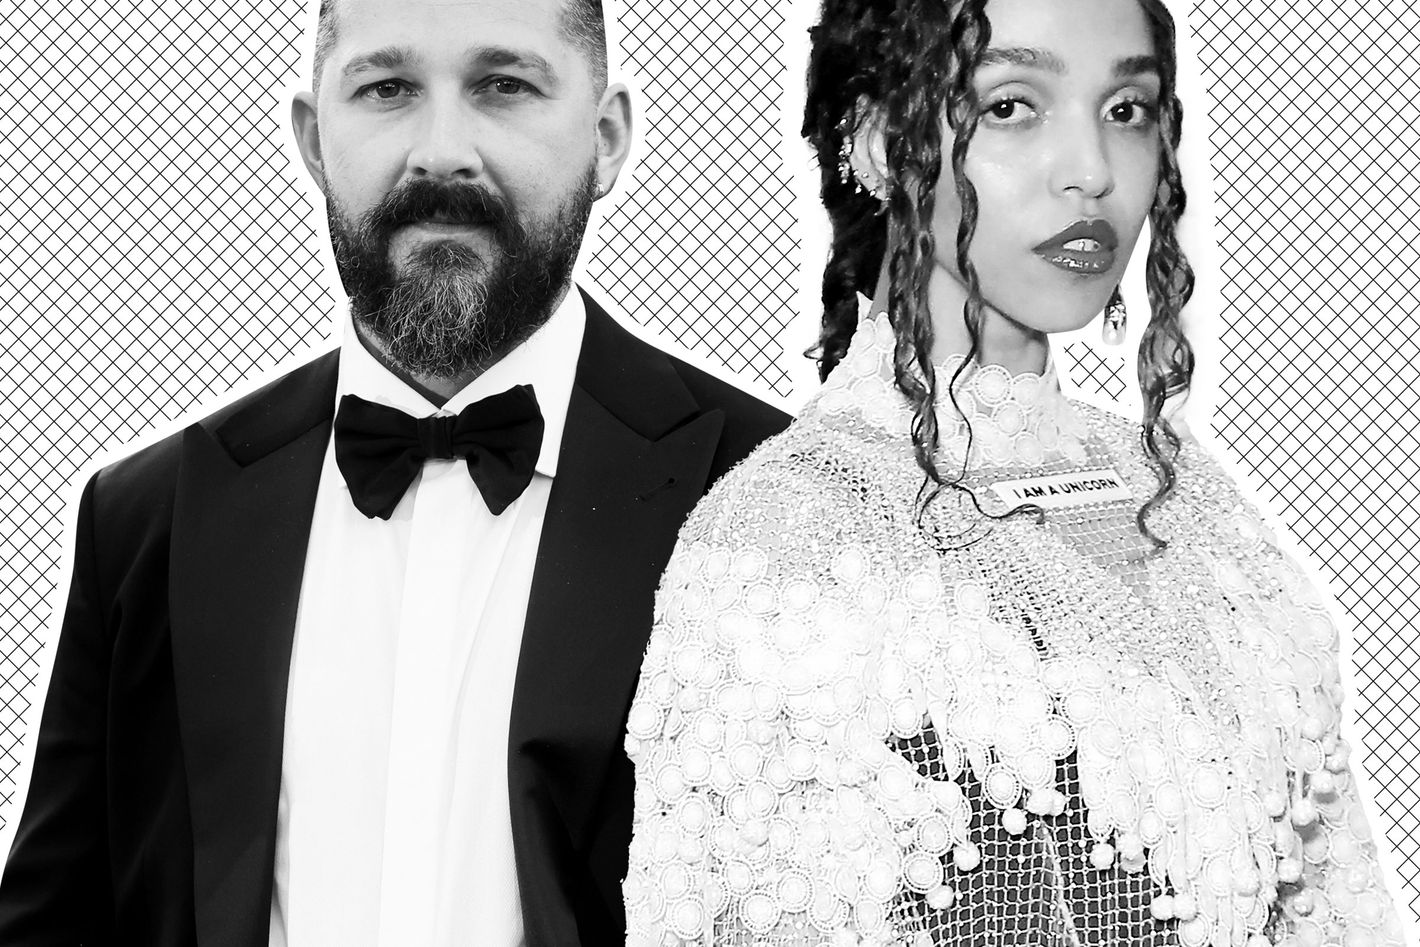 What We Know About FKA Twigs and Shia LaBeouf’s Legal Battle